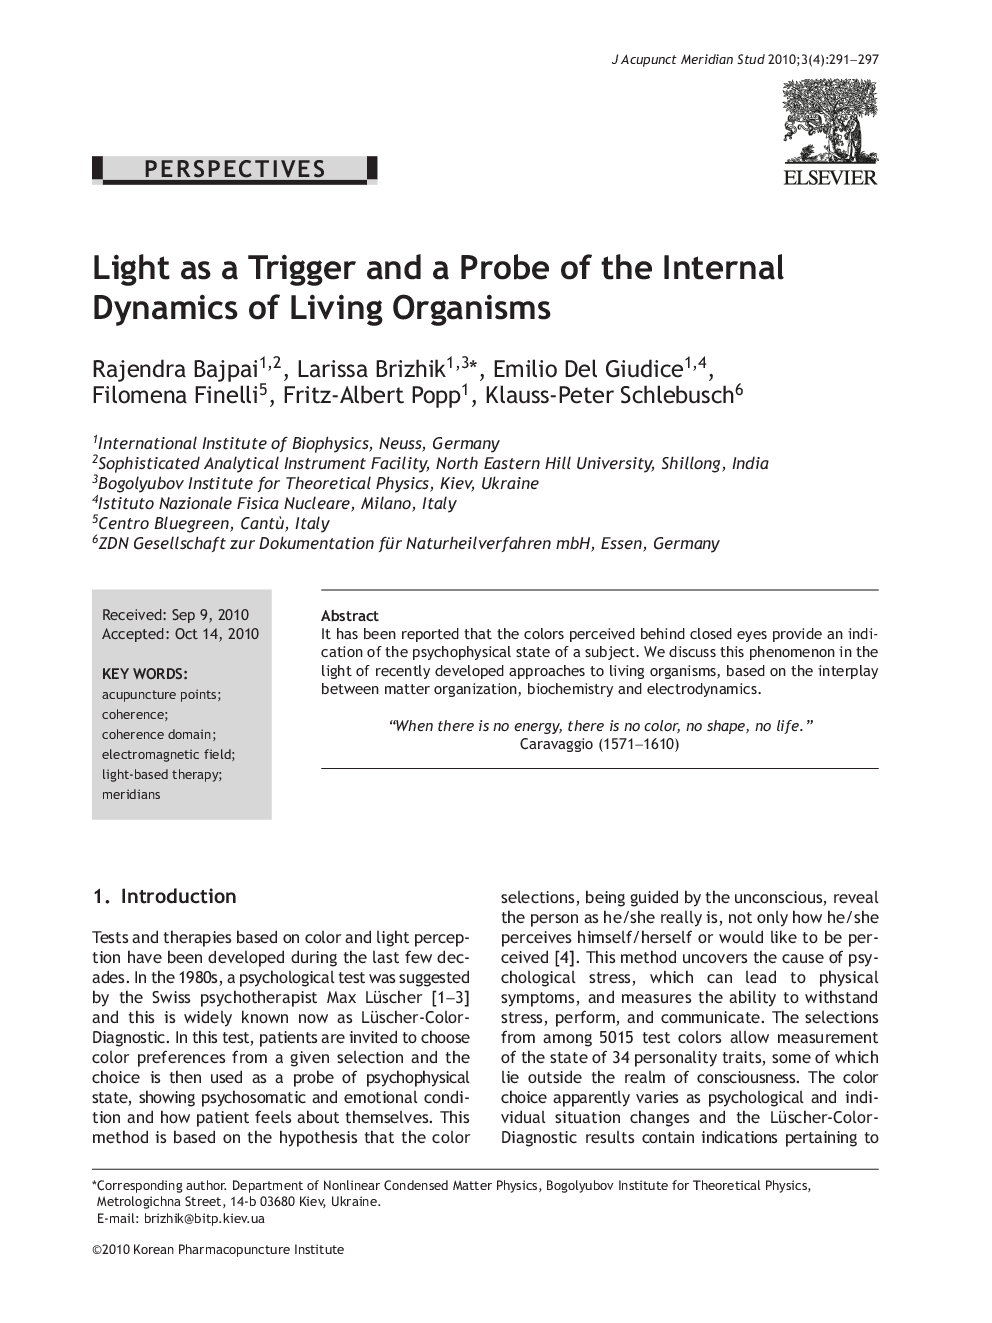 Light as a Trigger and a Probe of the Internal Dynamics of Living Organisms